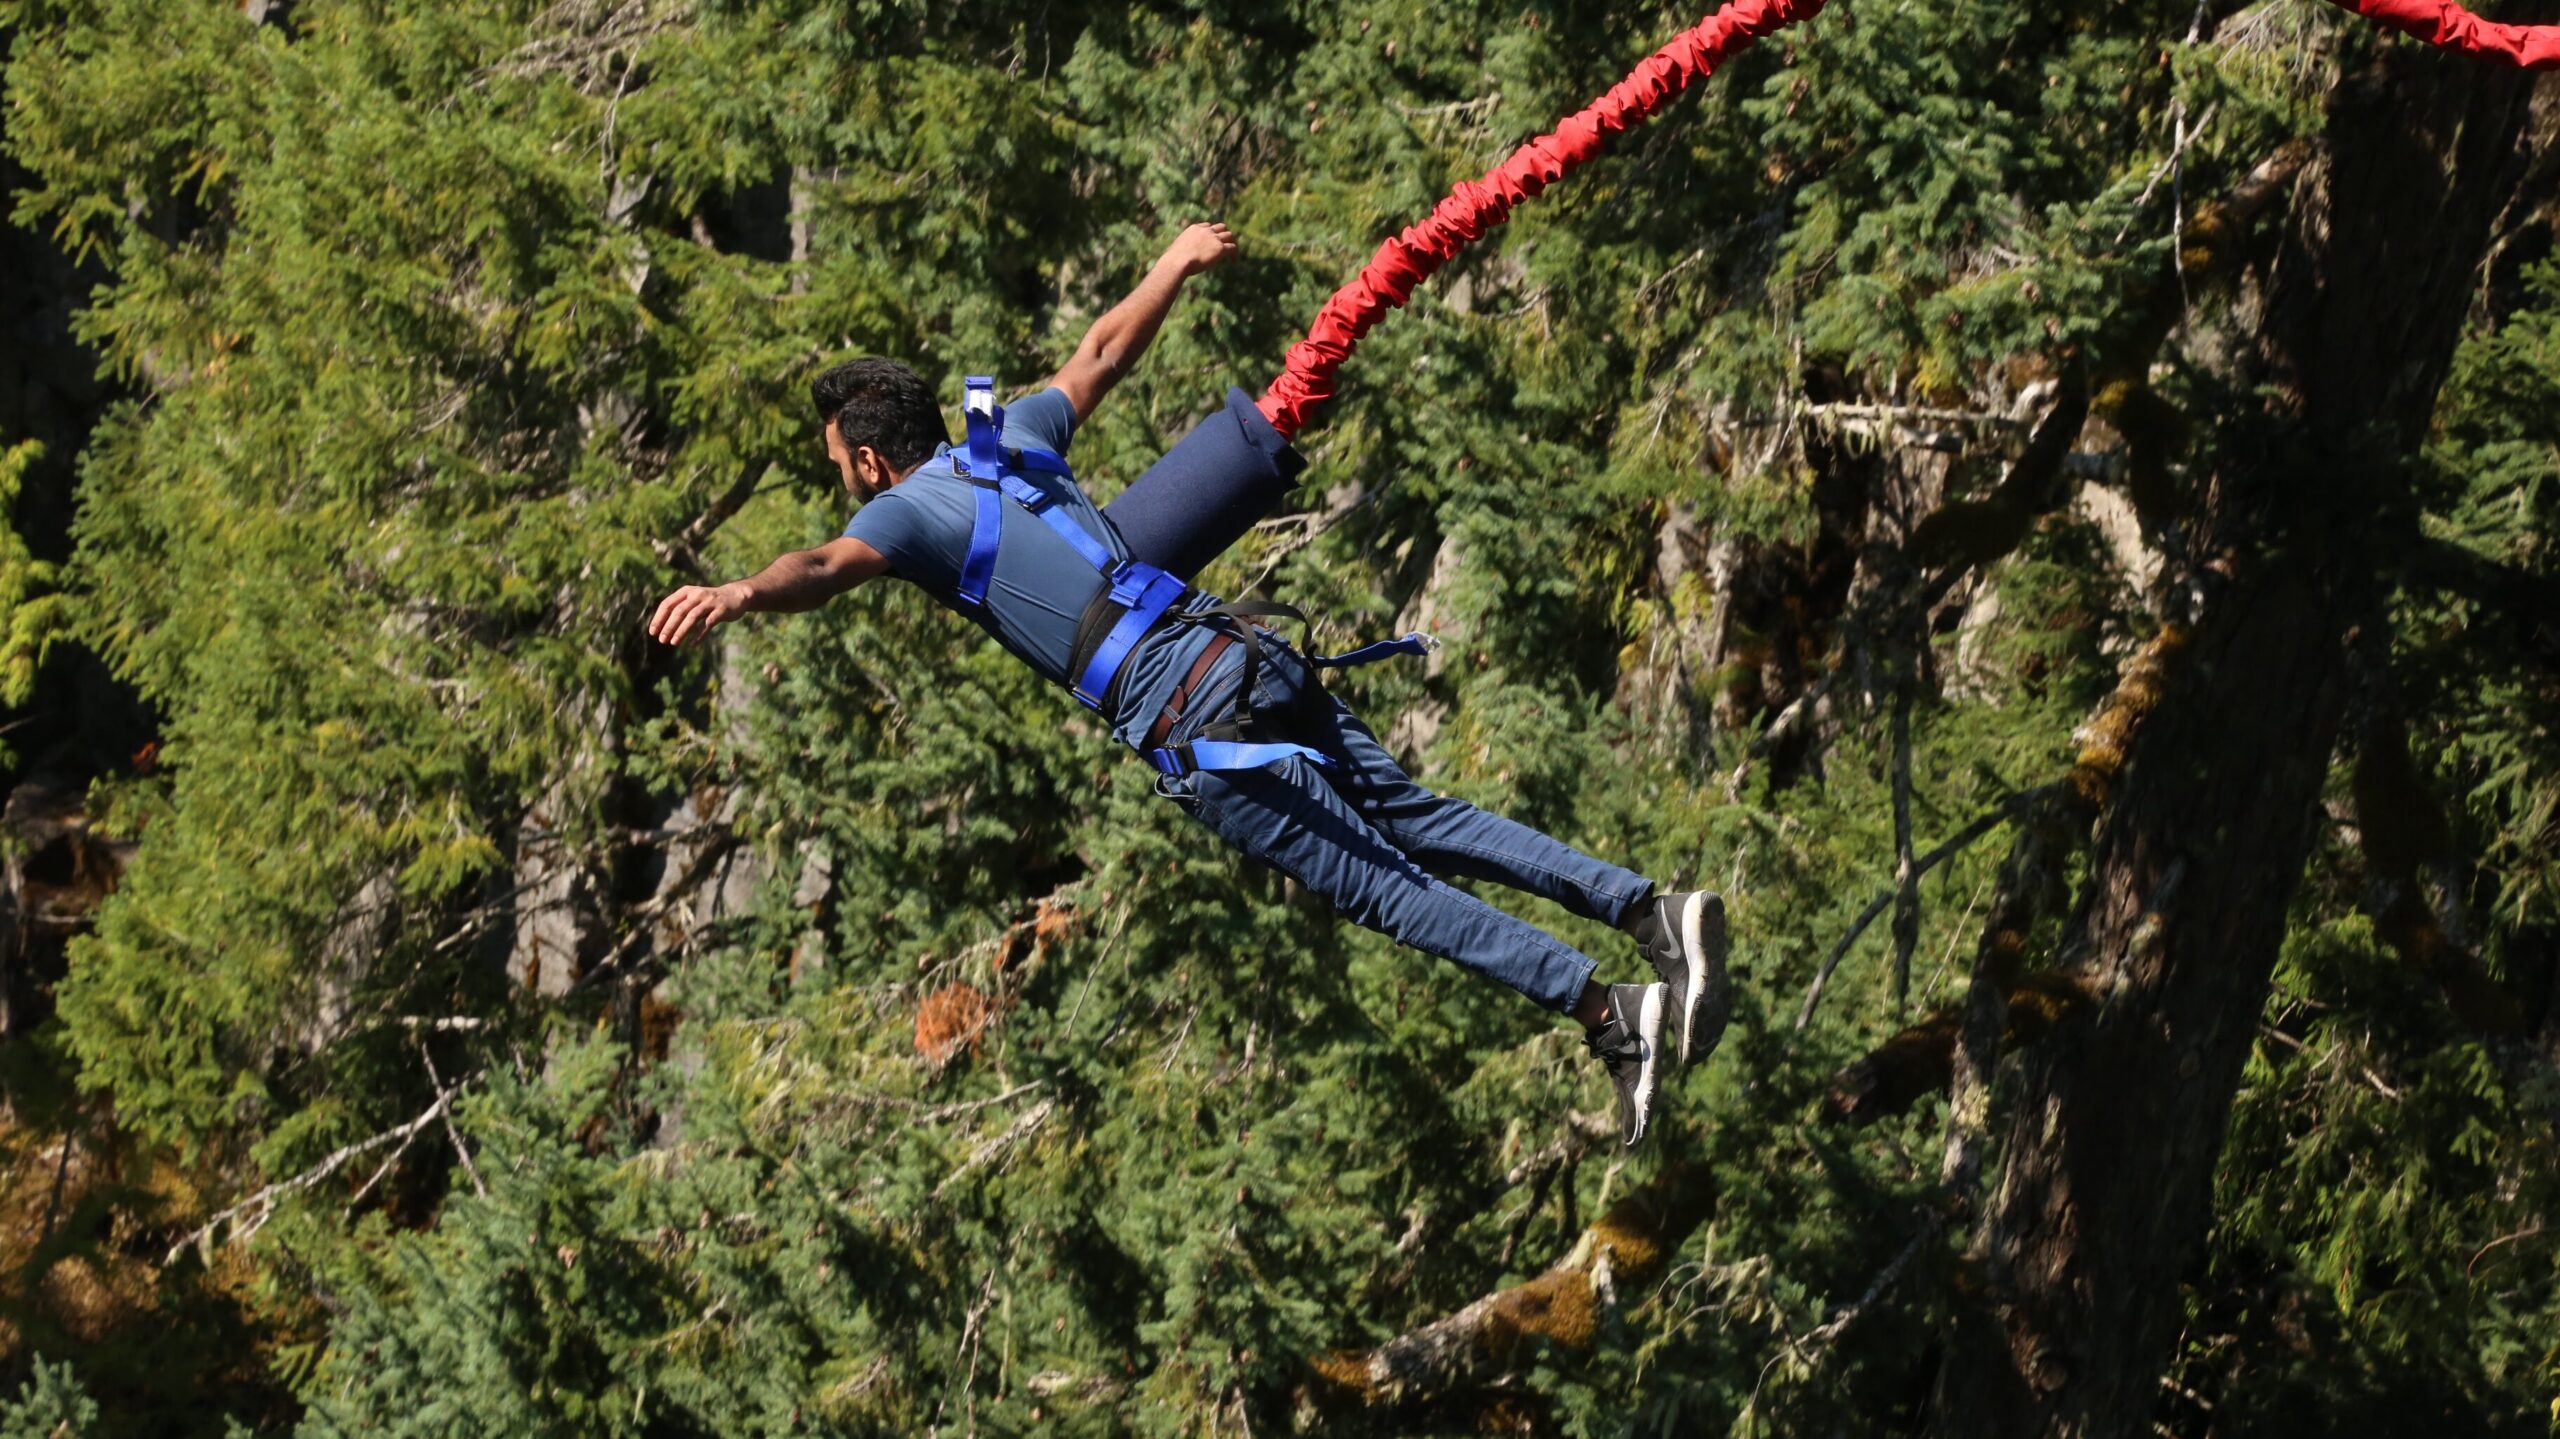 Bungee Jumping in Rishikesh is popular destinations in India for adventure travel. 